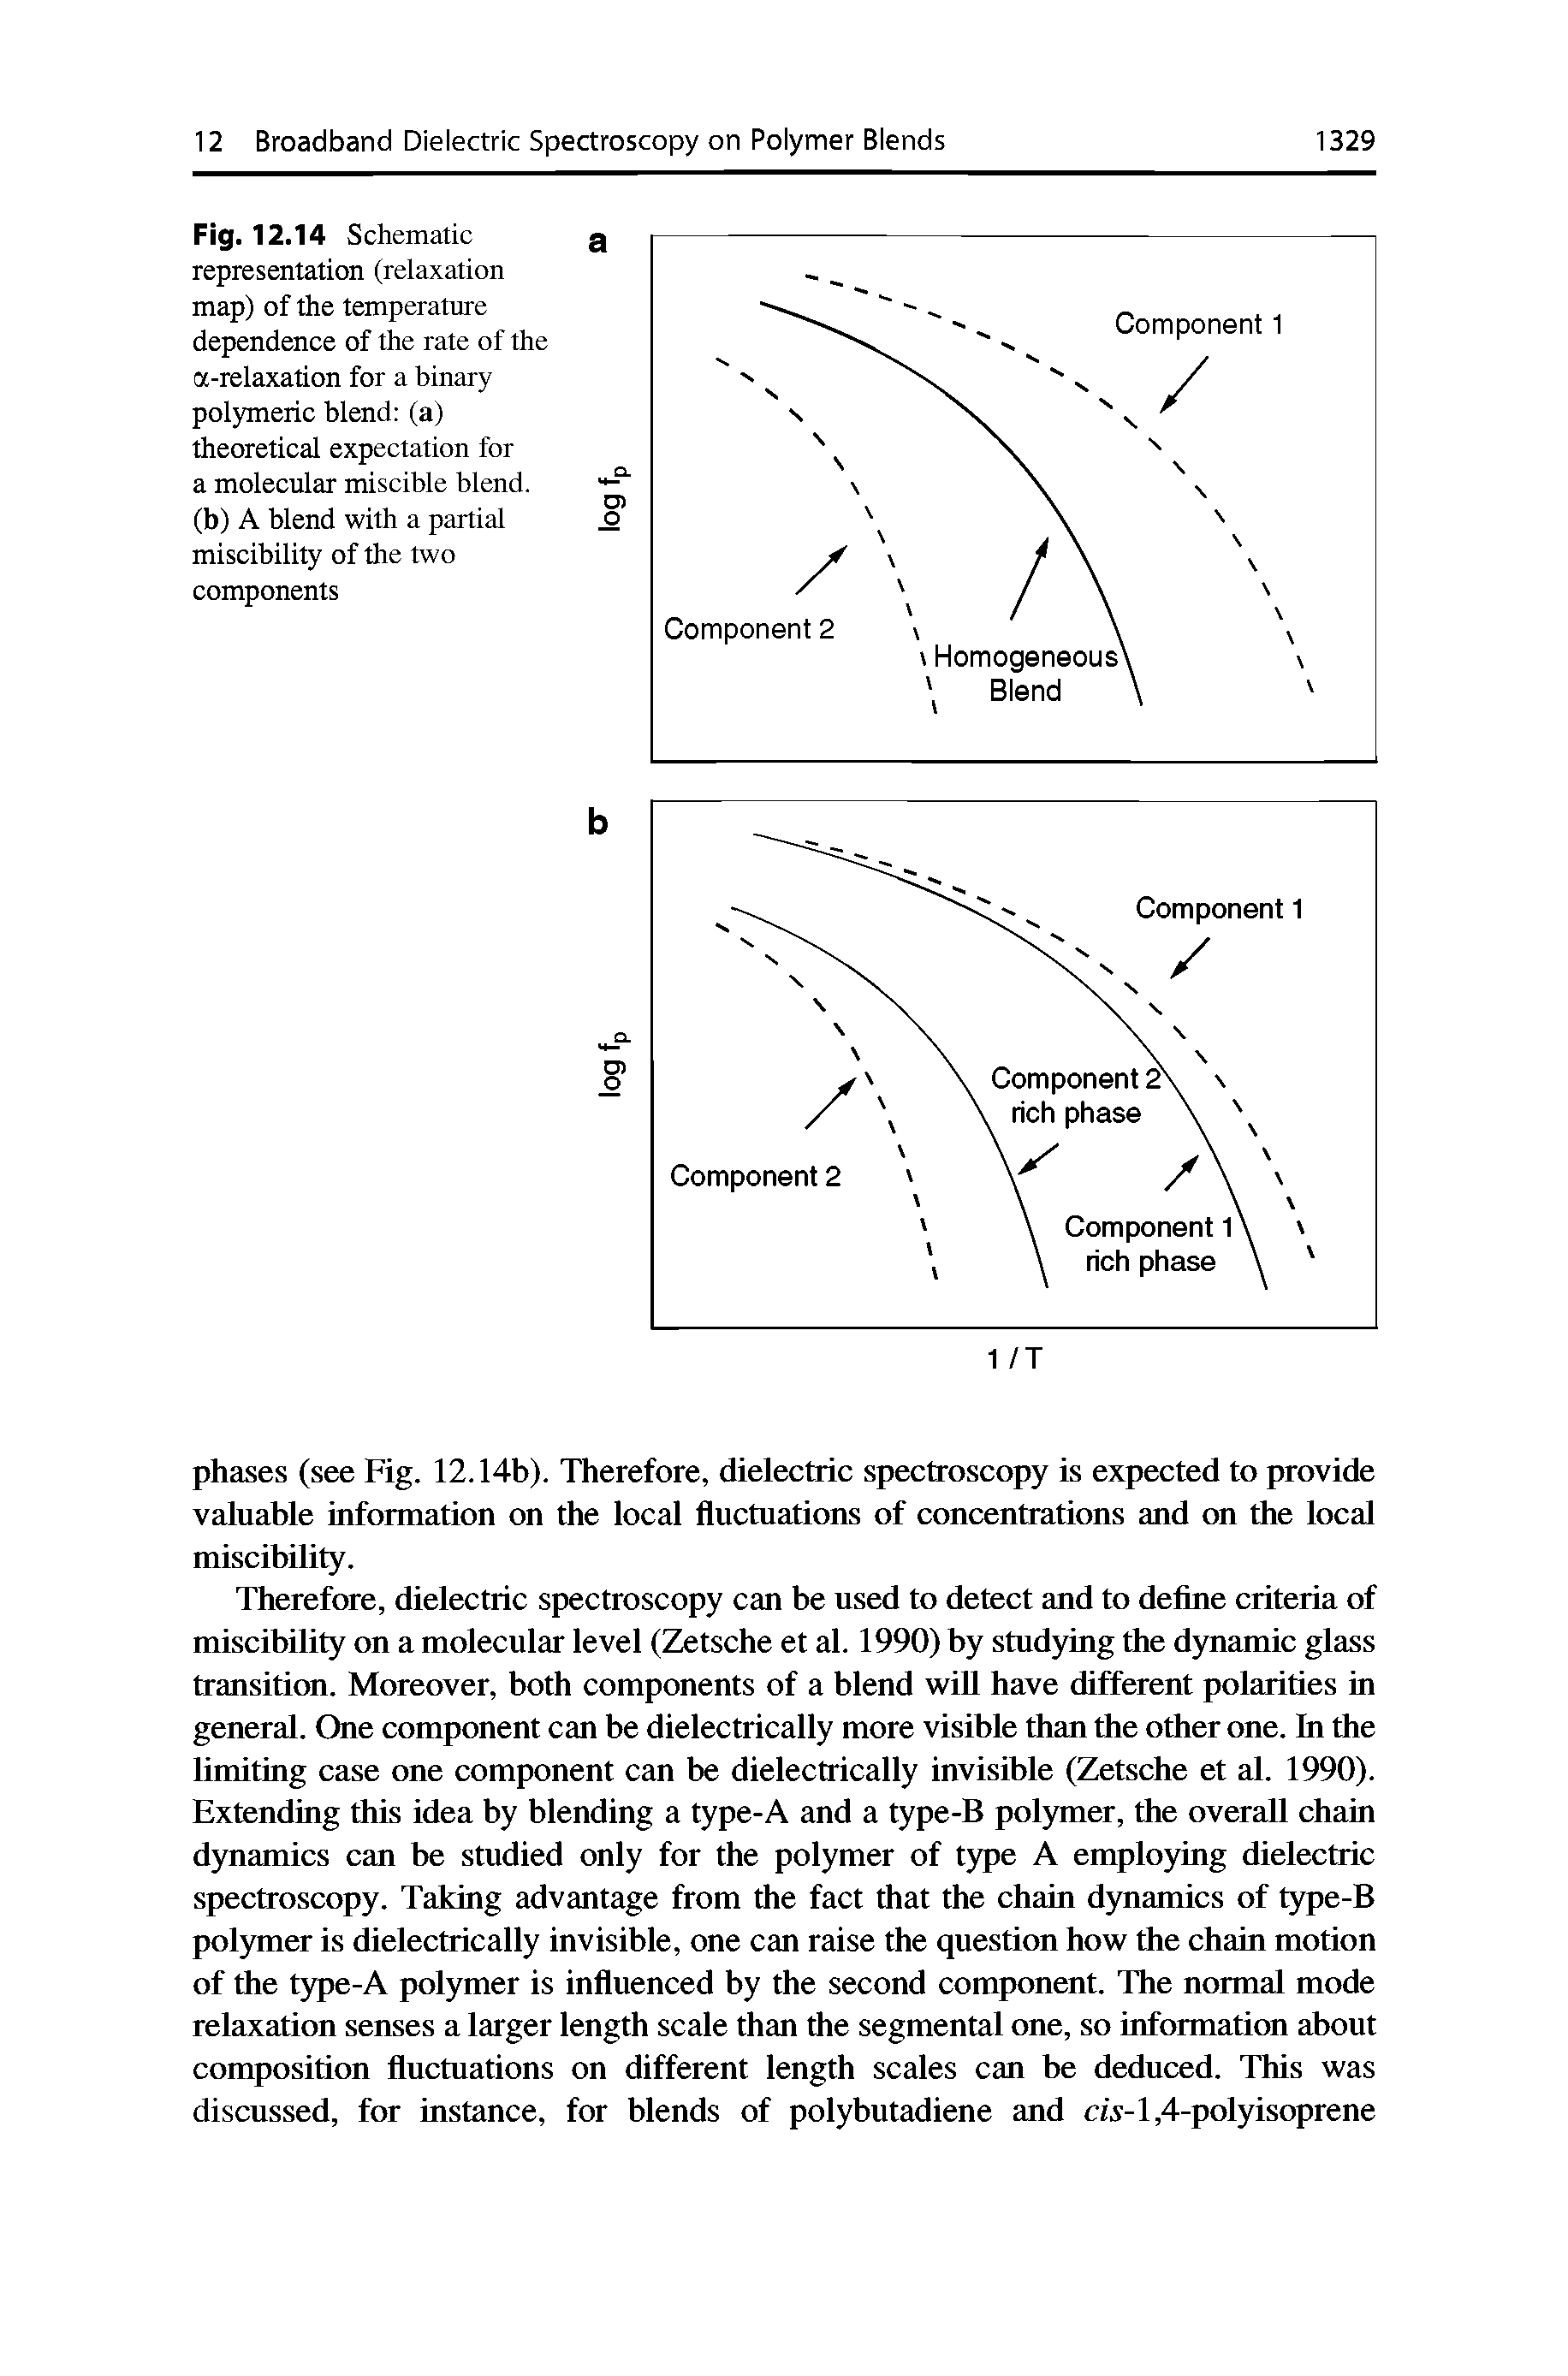 Fig. 12.14 Schematic representation (relaxation map) of the temperature dependence of the rate of the a-relaxation for a binary polymeric blend (a) theoretical expectation for a molecular miscible blend, (b) A blend with a partial miscibility of the two components...